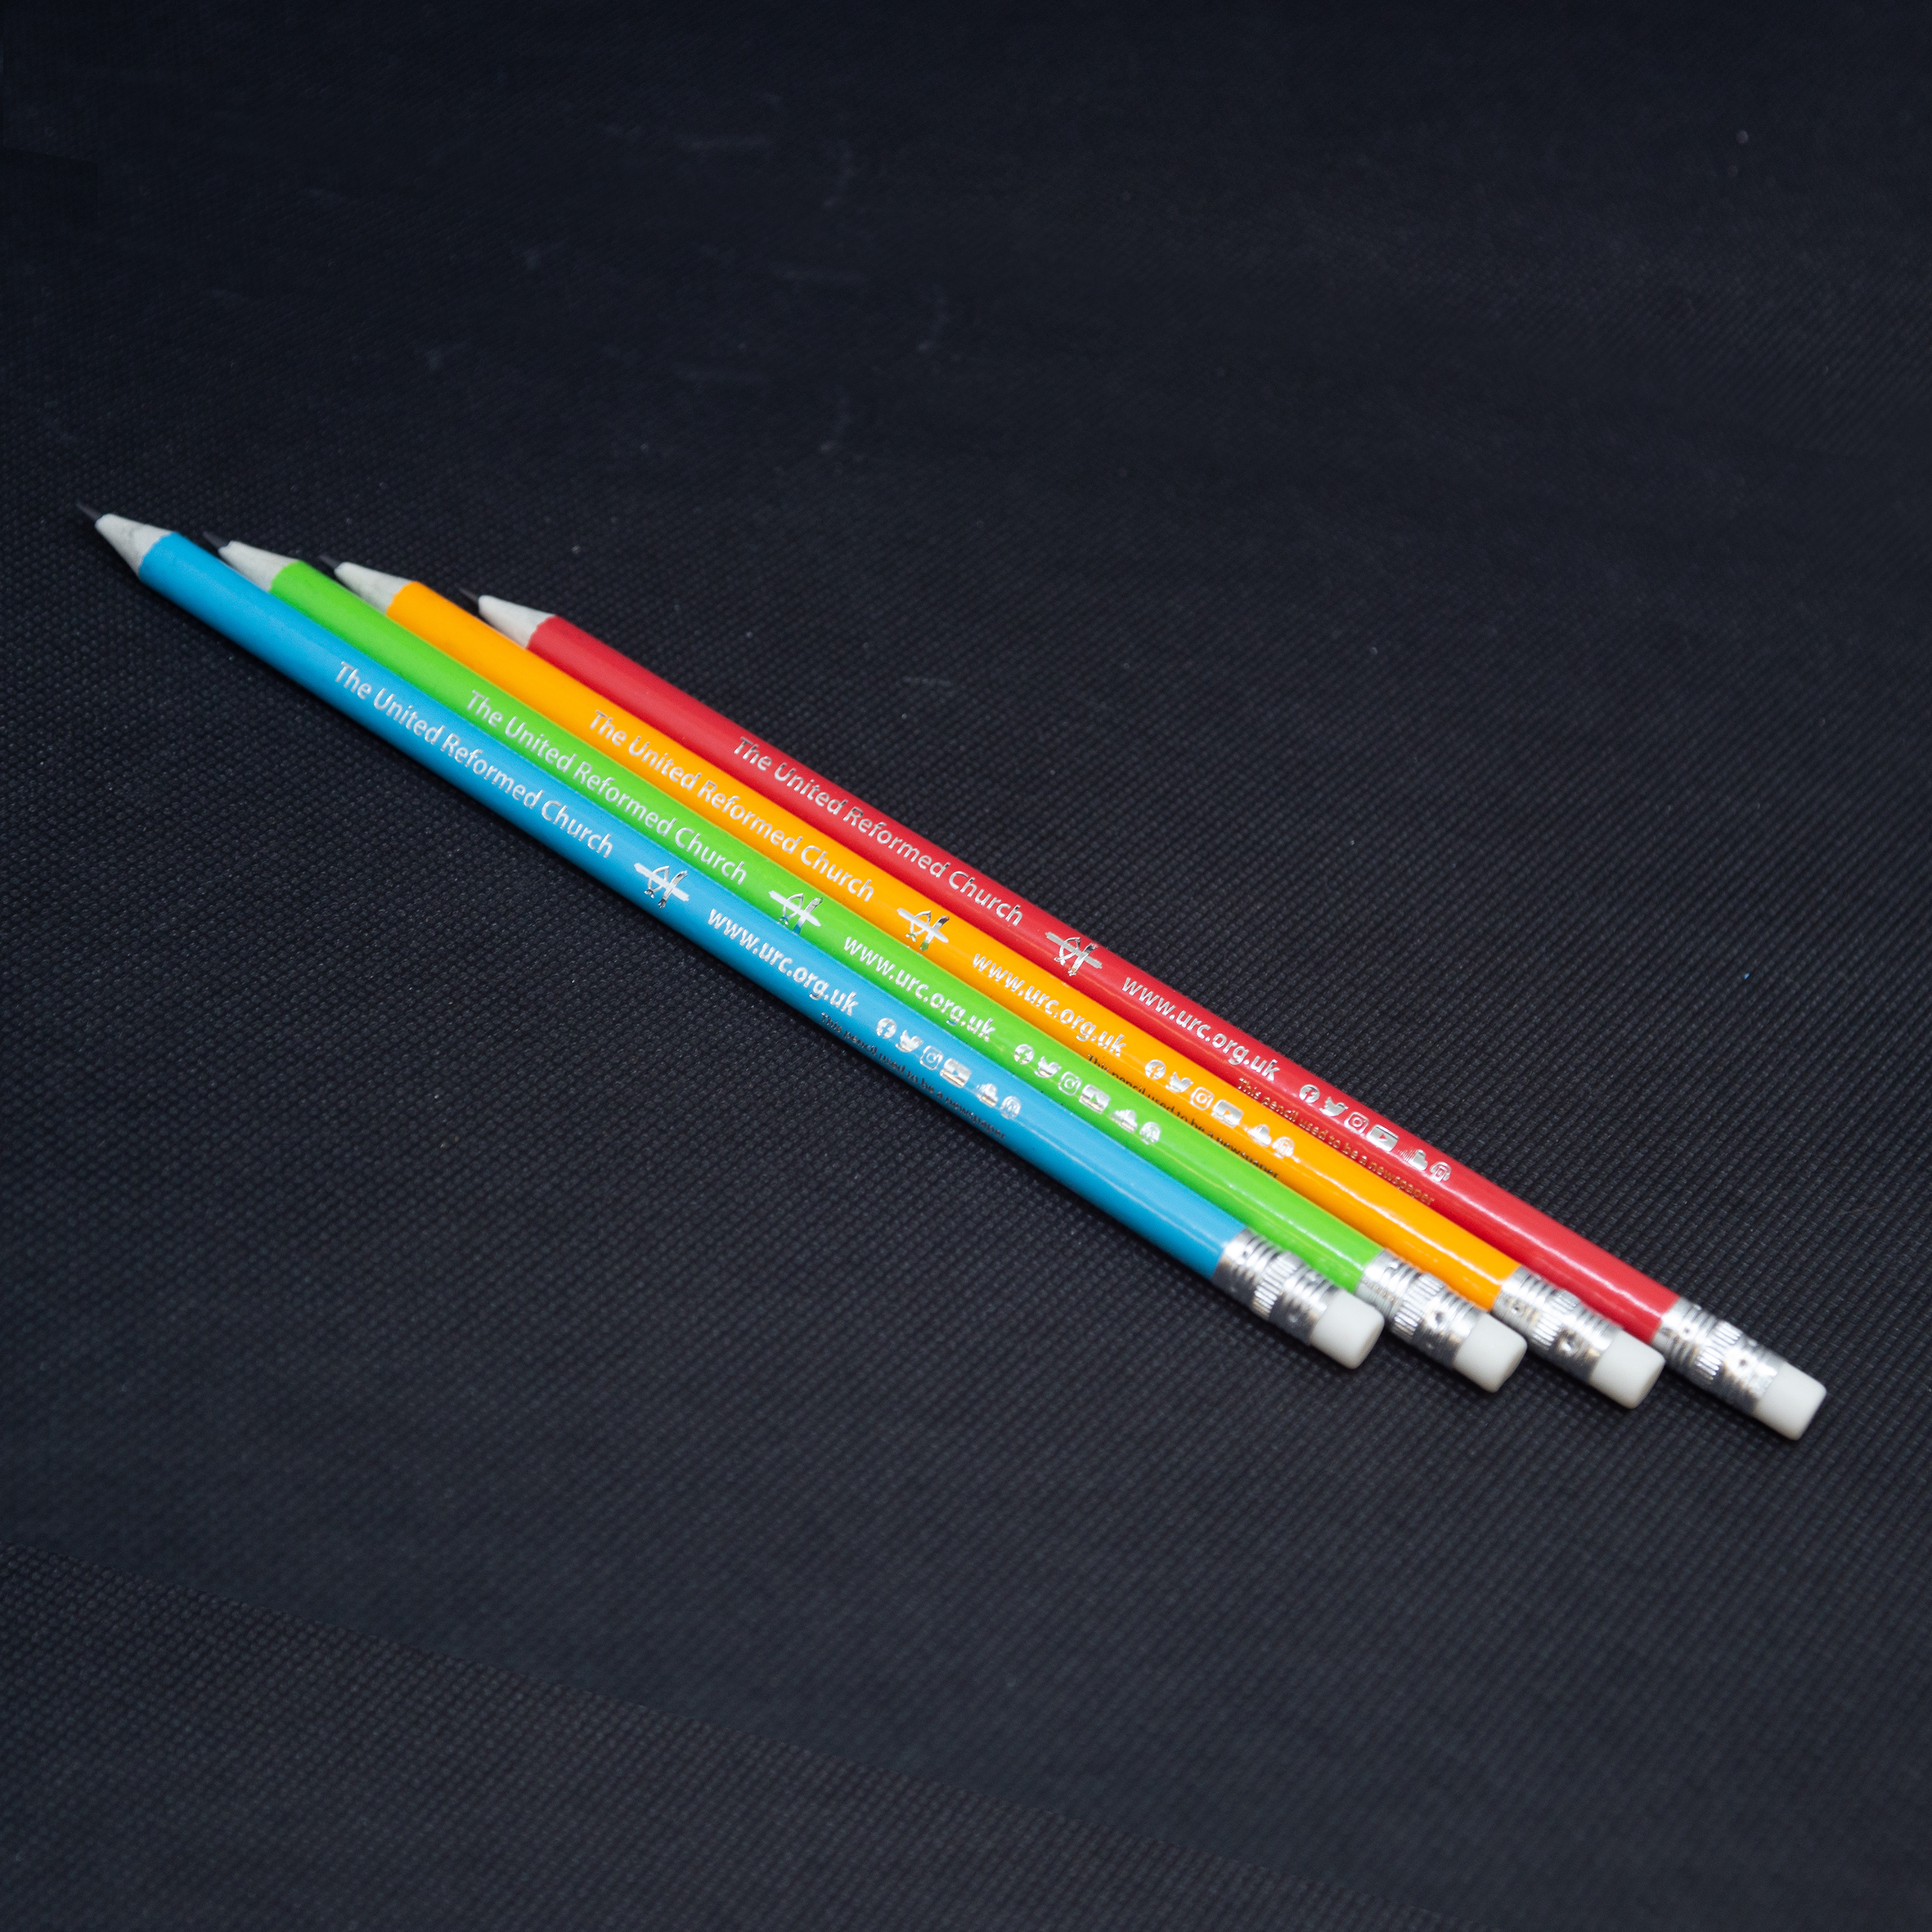 URC logo pencils made from recycled newspapers